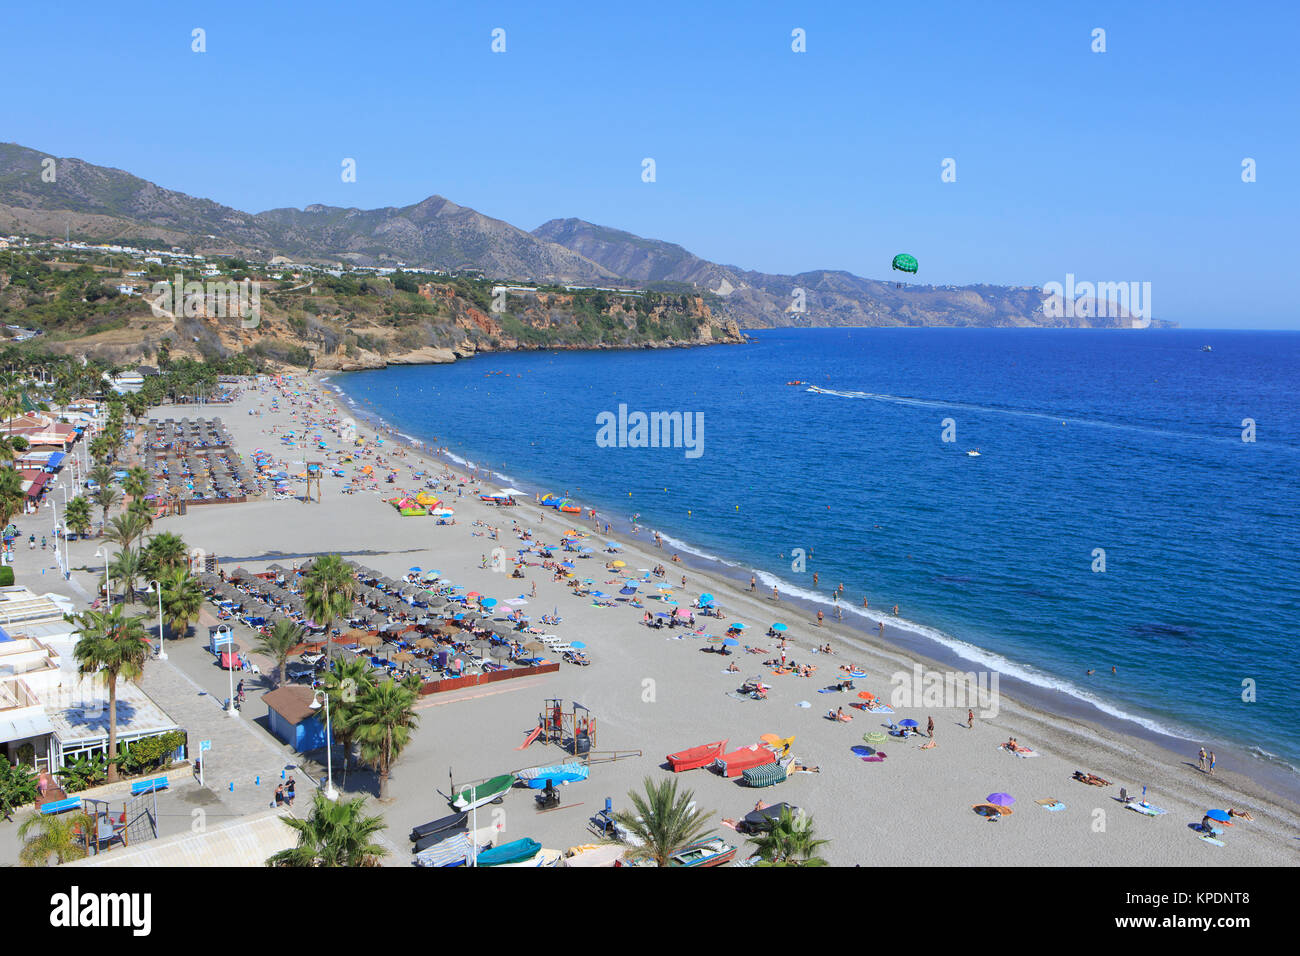 Panoramic view over Burriana Beach (Playa de Burriana) in Nerja on the Costa del Sol in the province of Malaga, Spain Stock Photo